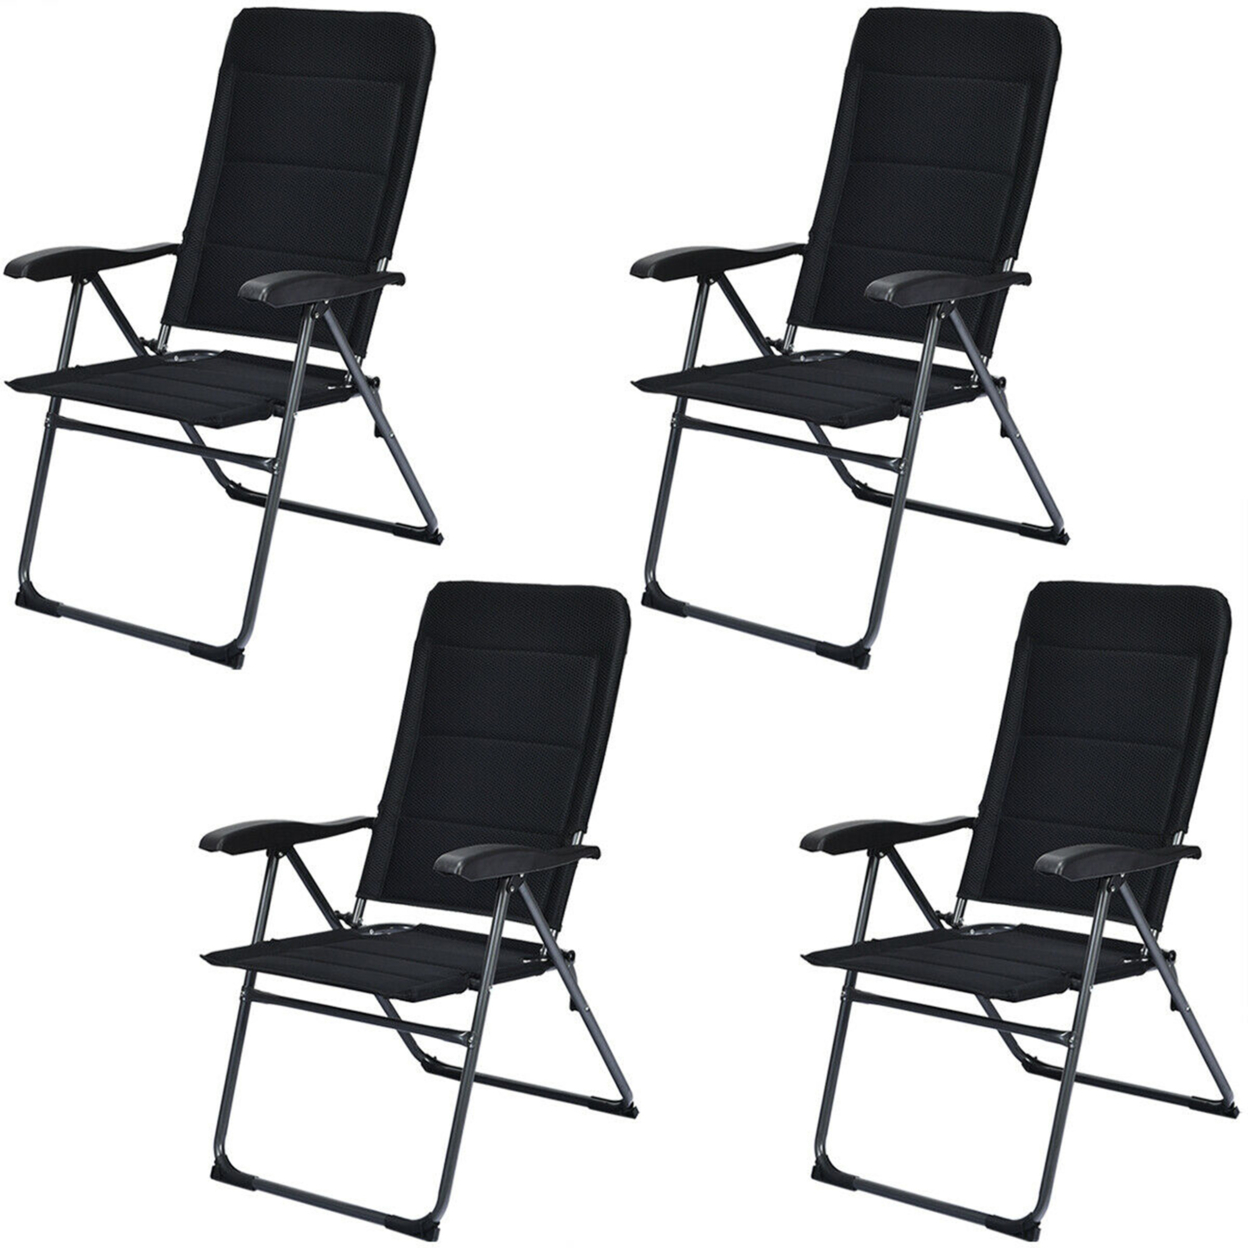 4PCS Patio Folding Chairs Back Adjustable Reclining Padded Garden Furniture